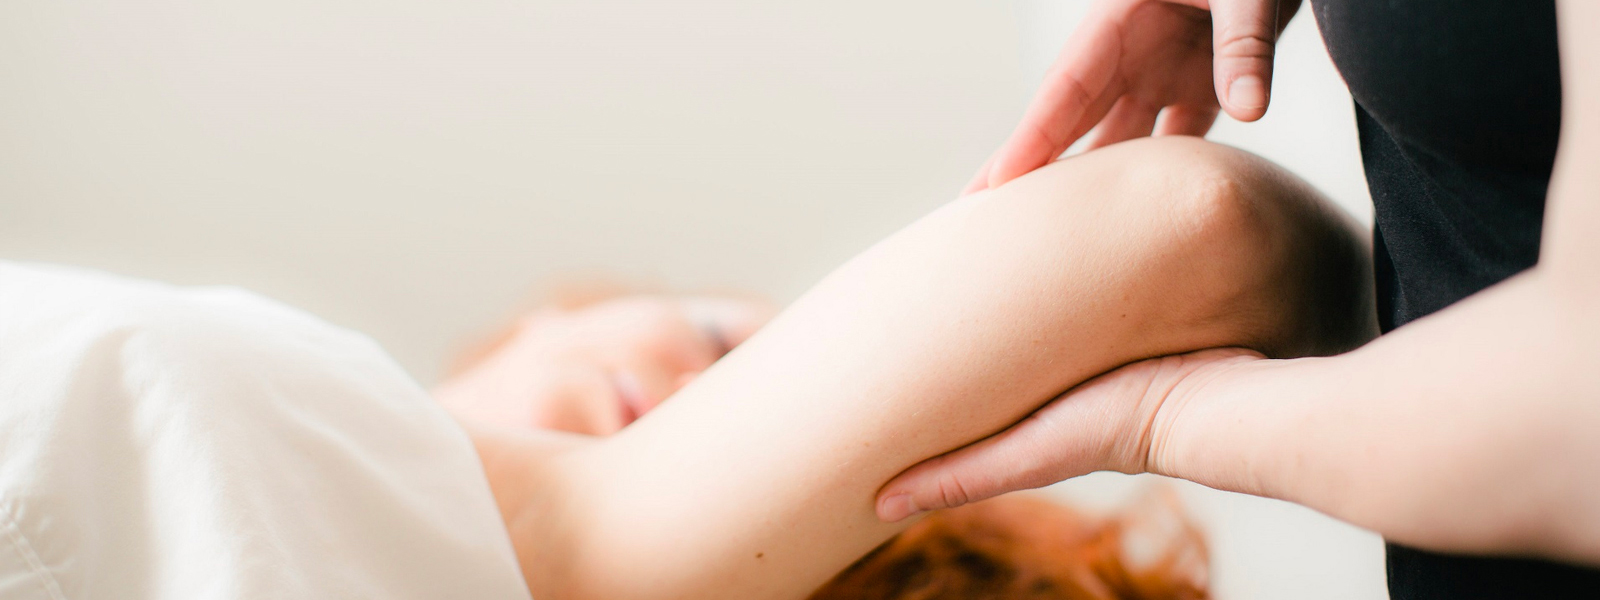 Everything You Need To Know About Manual Lymphatic Drainage